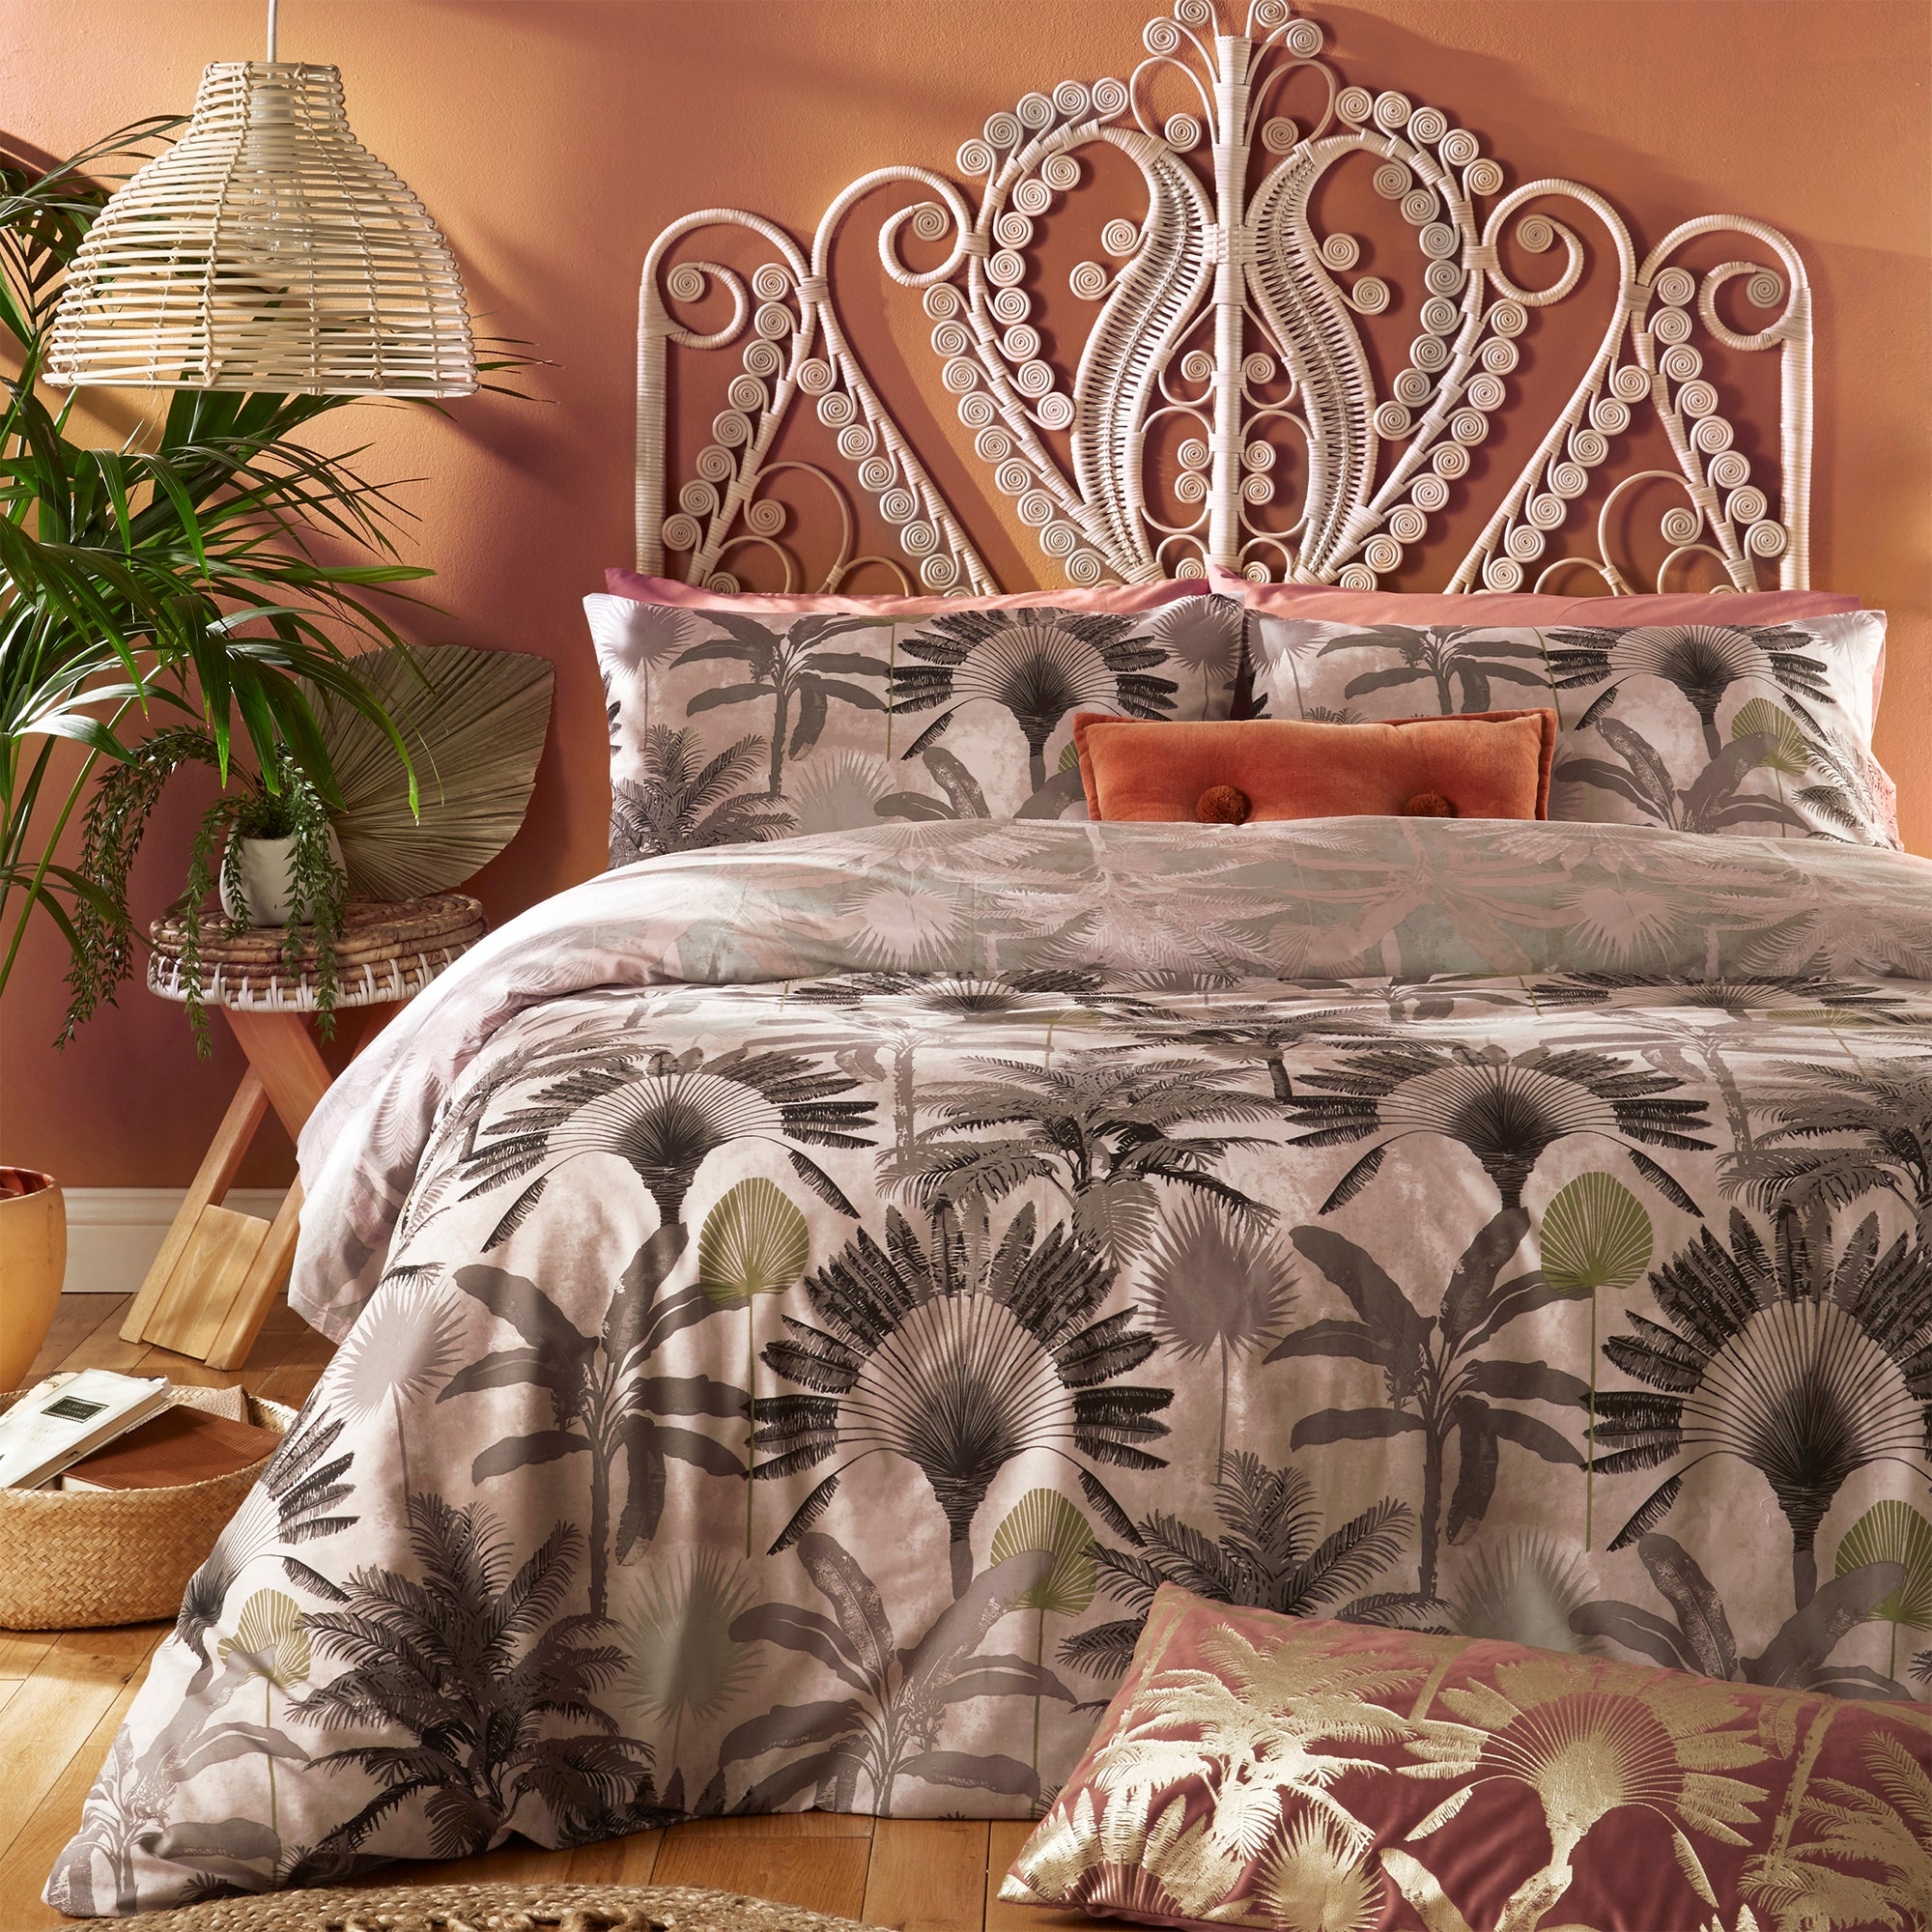 Furn Malaysian Palm Blush Floral Reversible Duvet Cover And Pillowcase Set Beigebrown